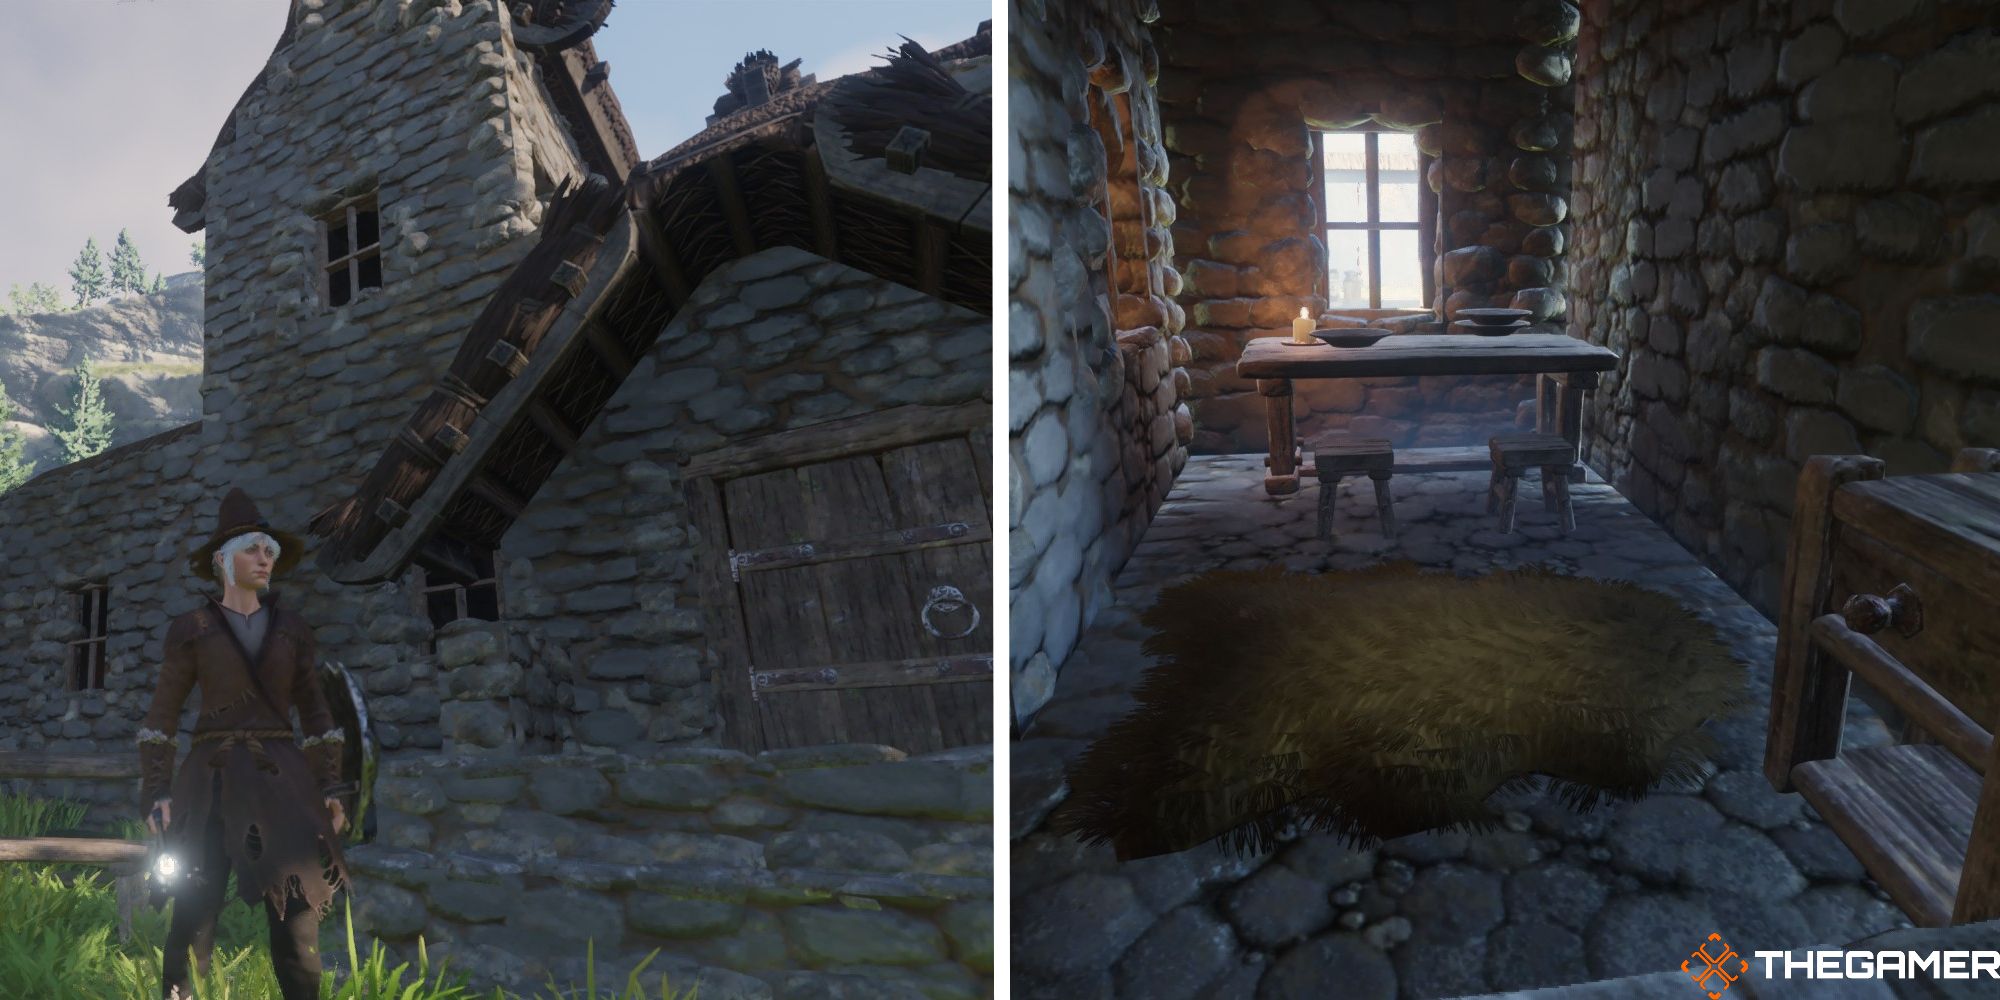 enshrouded split image showing player standing in front of house next to image of house interior